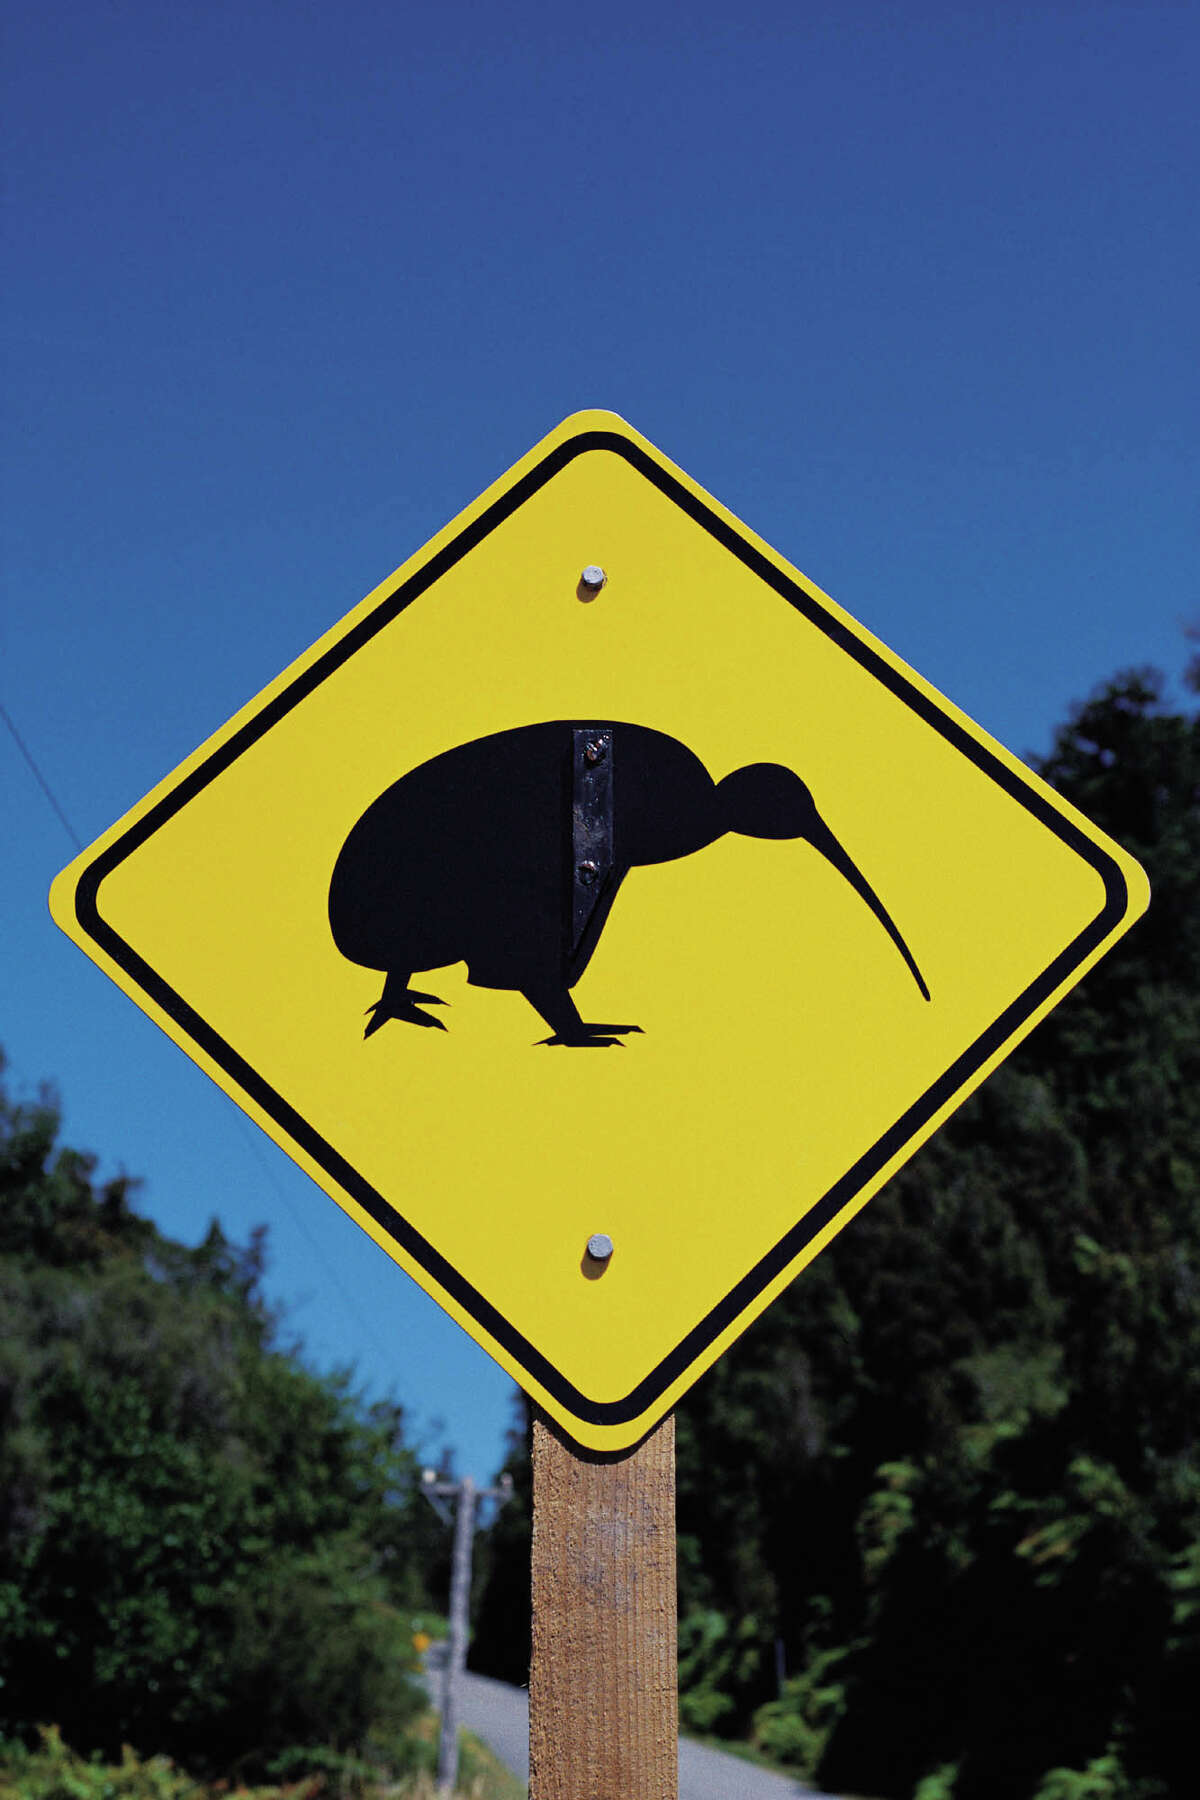 10. The New Zealand air forceâs mascot is the kiwi bird. Why is this unlikely to engender fear and respect among the nationâs enemies?